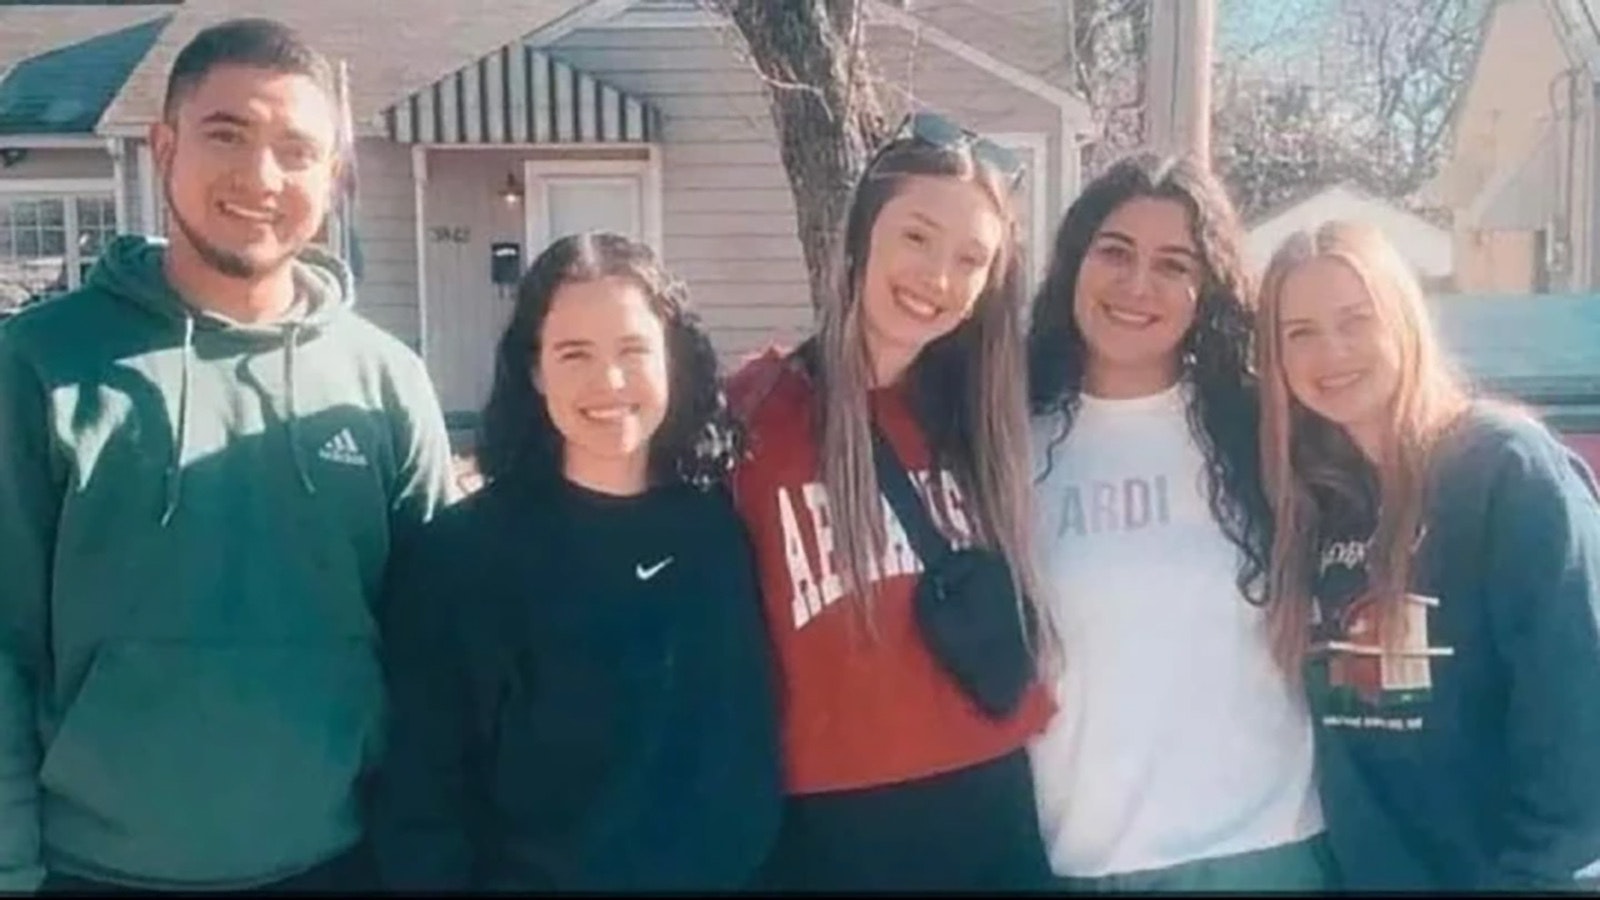 The five young people killed in the Jan. 22, 2023, crash caused by a wrong-way driver on Interstate 80 near Rawlins, Wyoming, are, not in order, Suzy Prime, Ava Luplow, Salomon Correa, Magdalene “Maggie” Franco and Andrea Prime. There were all on their way home to Arkansas after a visit to a Wyoming Bible college.